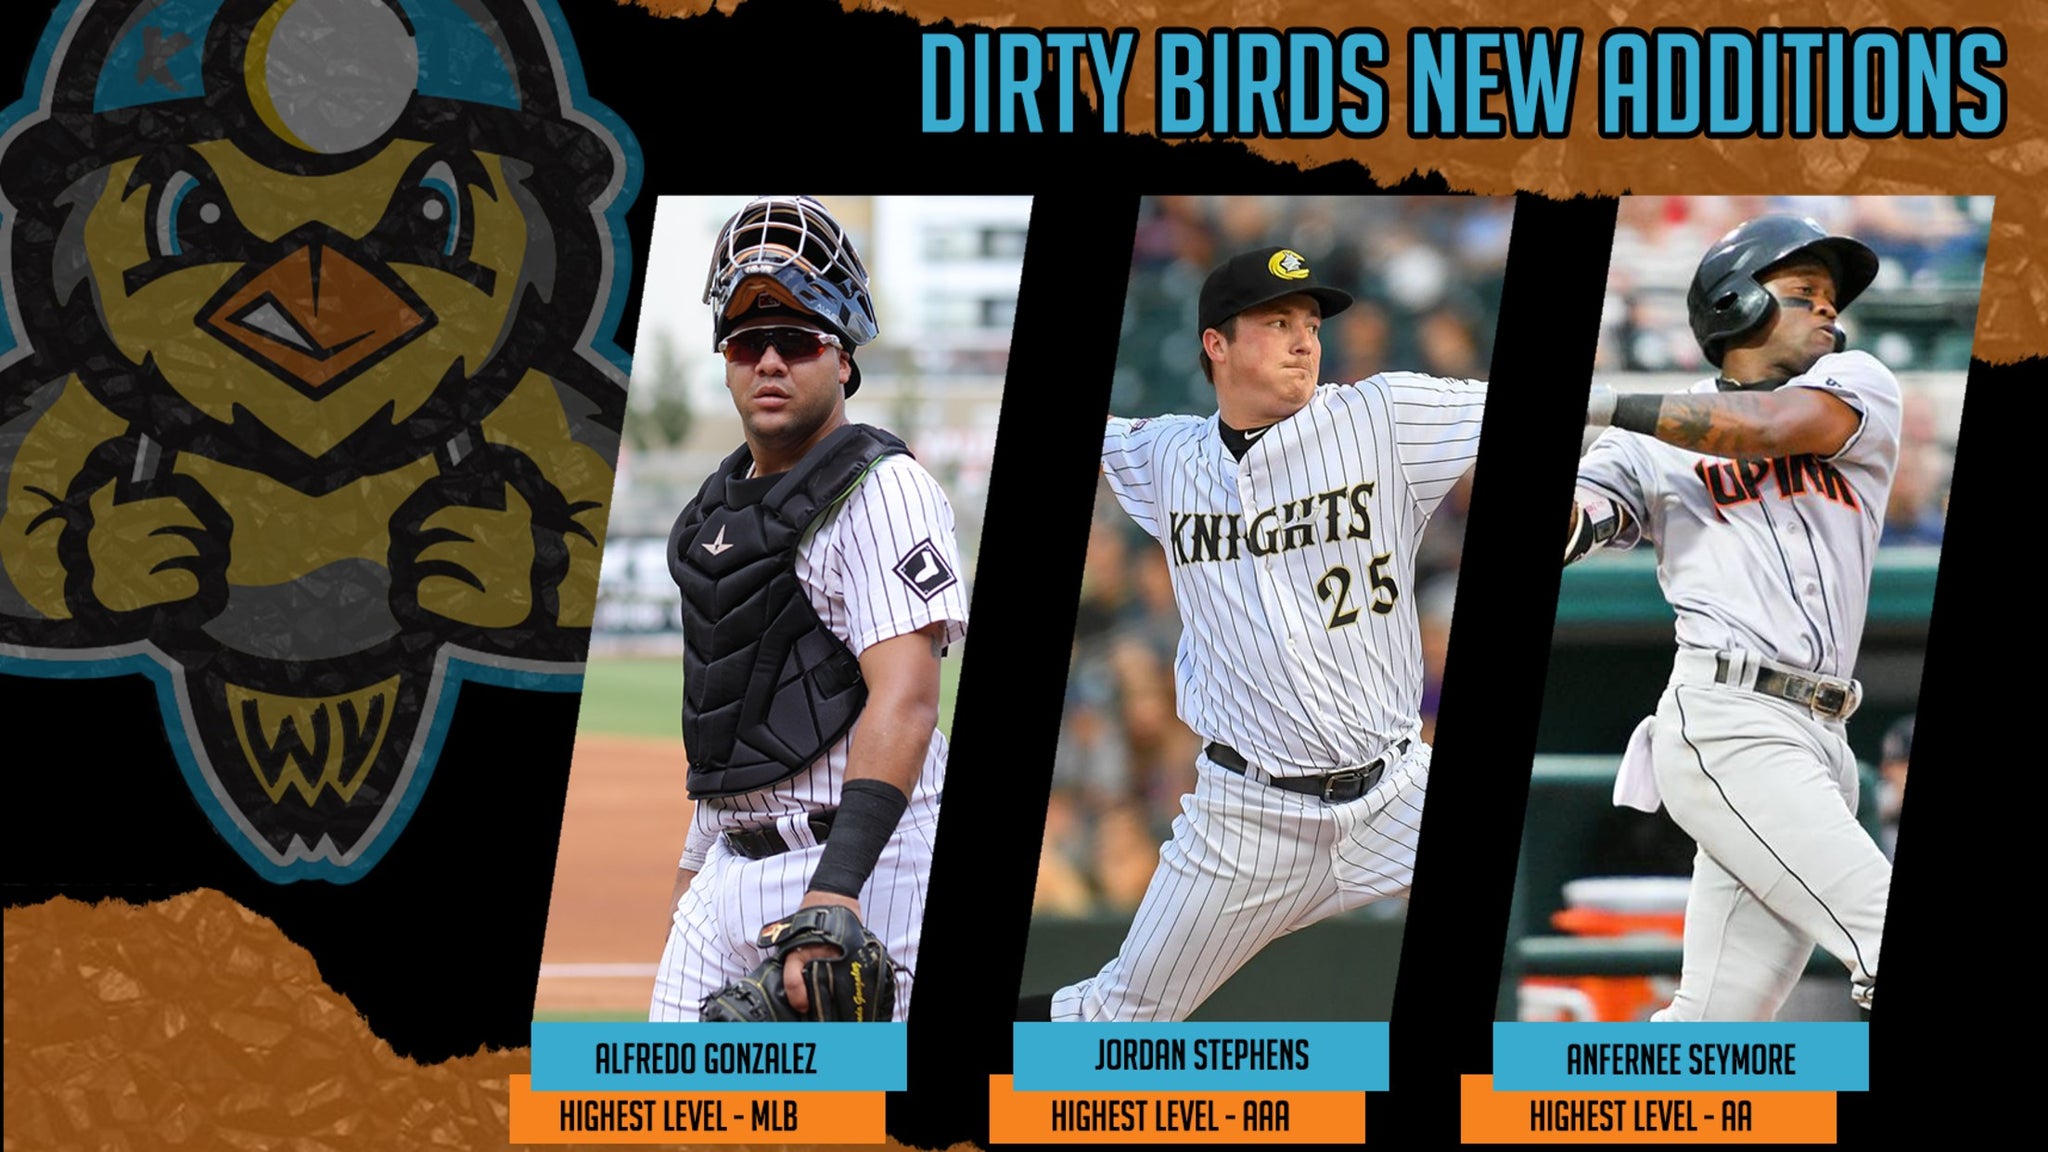 DIRTY BIRDS ANNOUNCE SIX NEW PLAYERS JOINING THE 2022 ROSTER